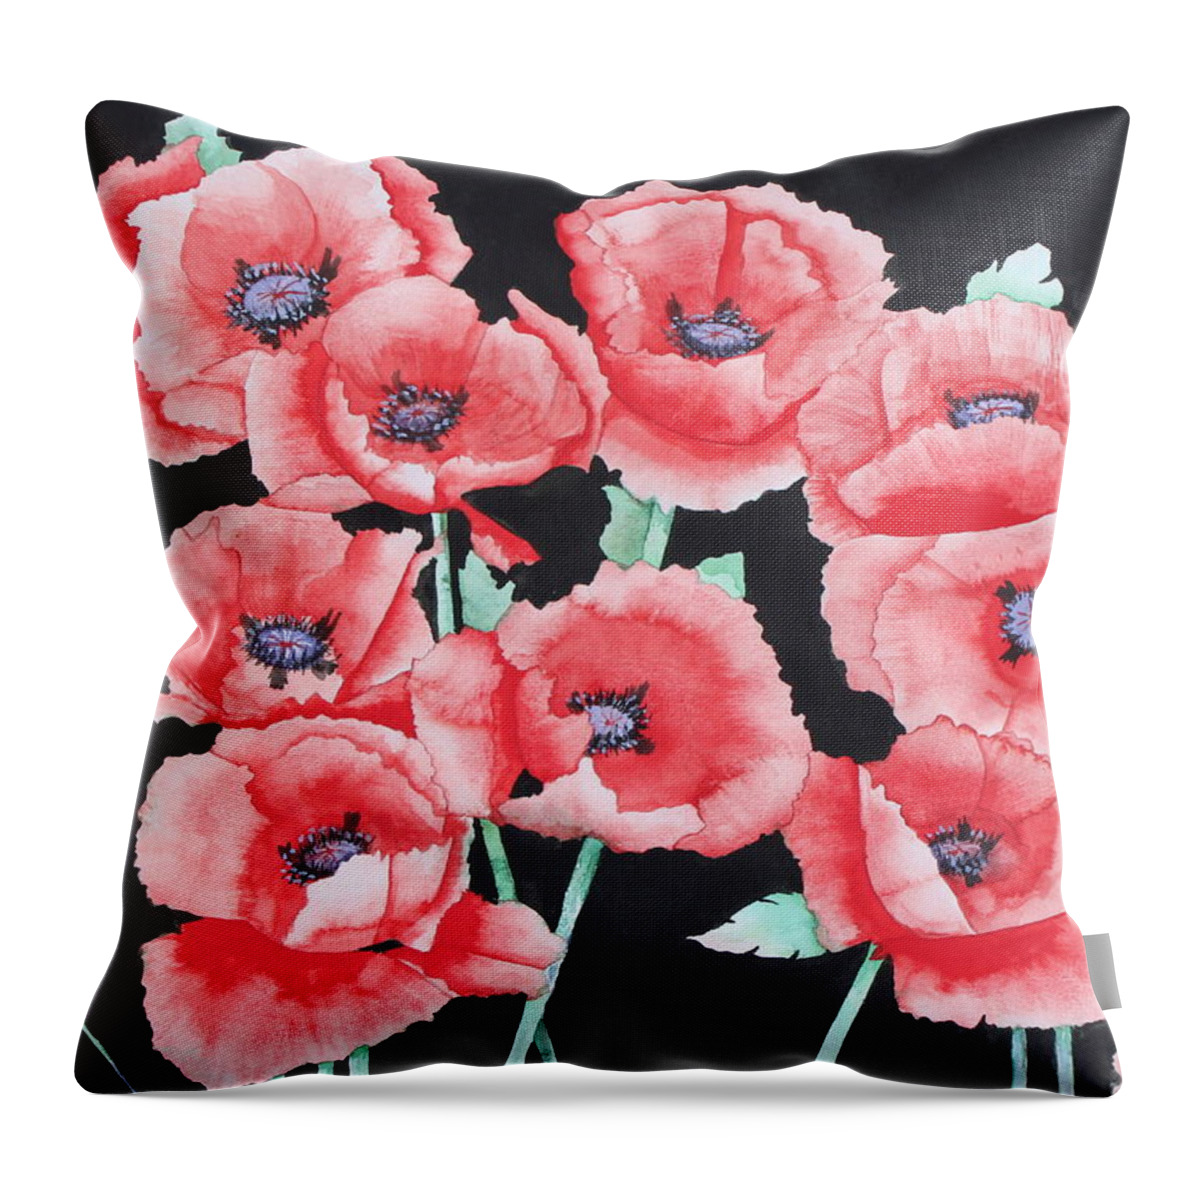 Flowers Throw Pillow featuring the painting Red Poppy Drama Watercolor by Kimberly Walker